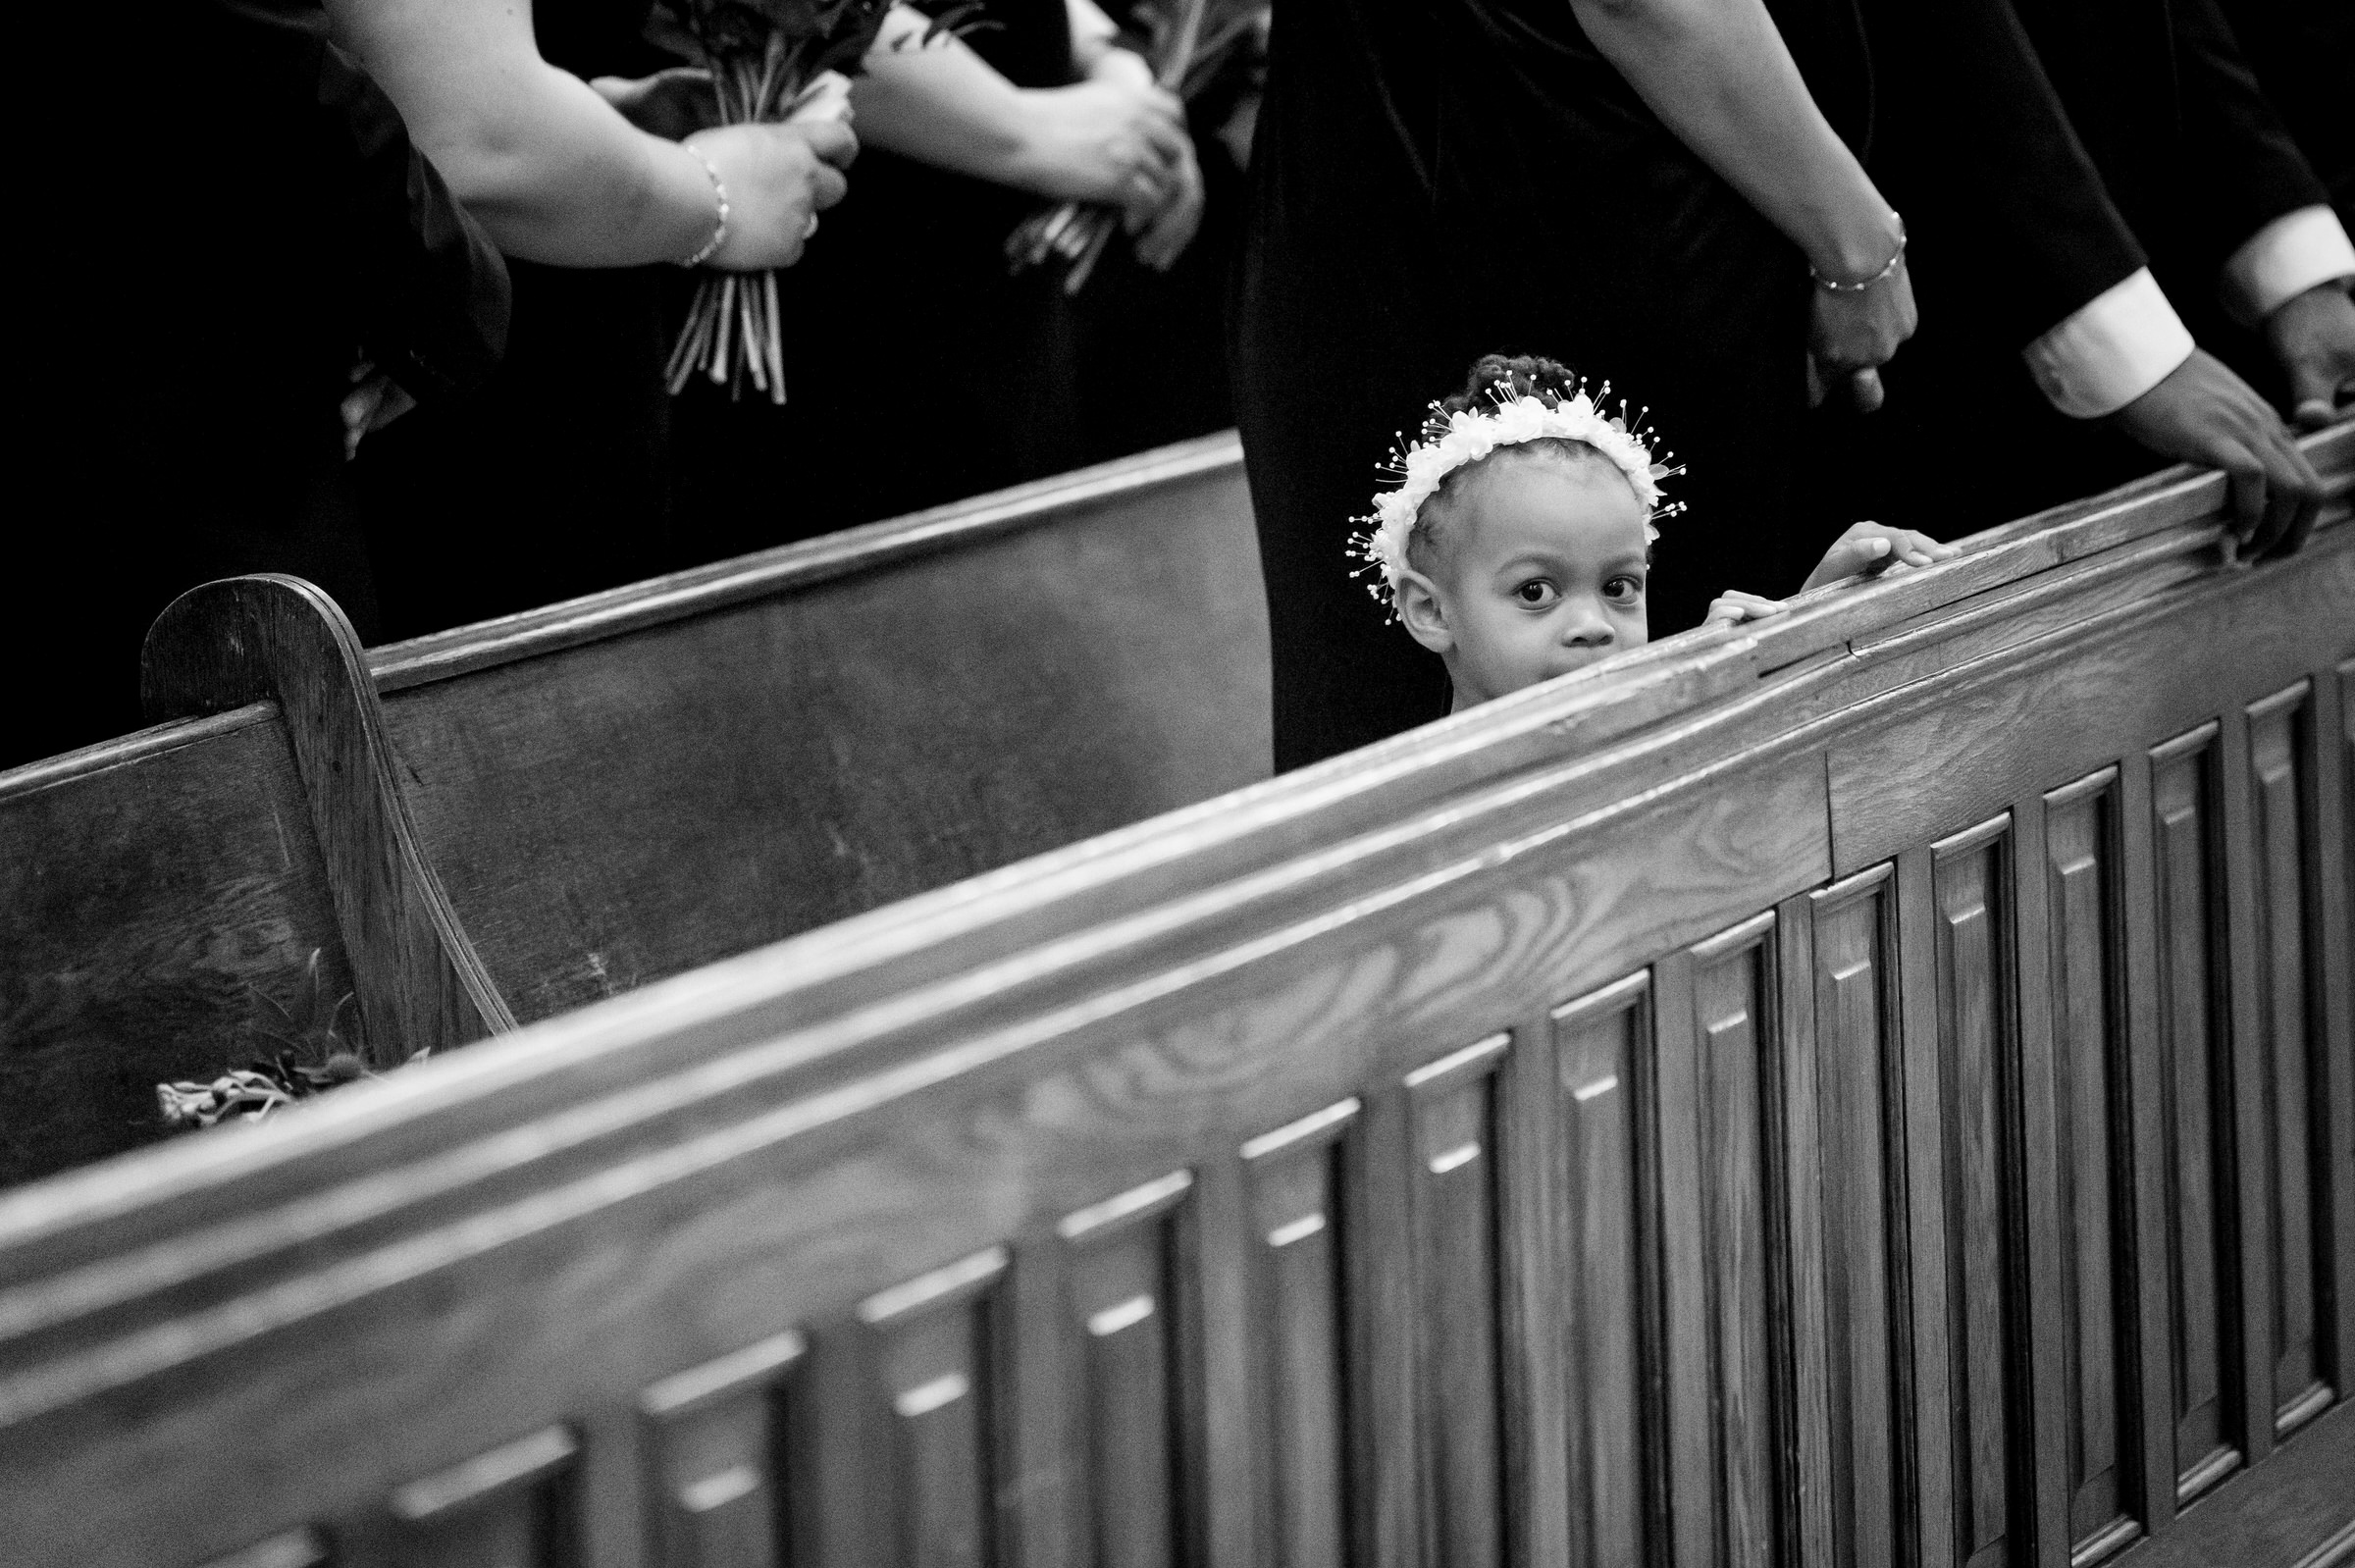 A little girl looks over the pew during a wedding ceremony.  